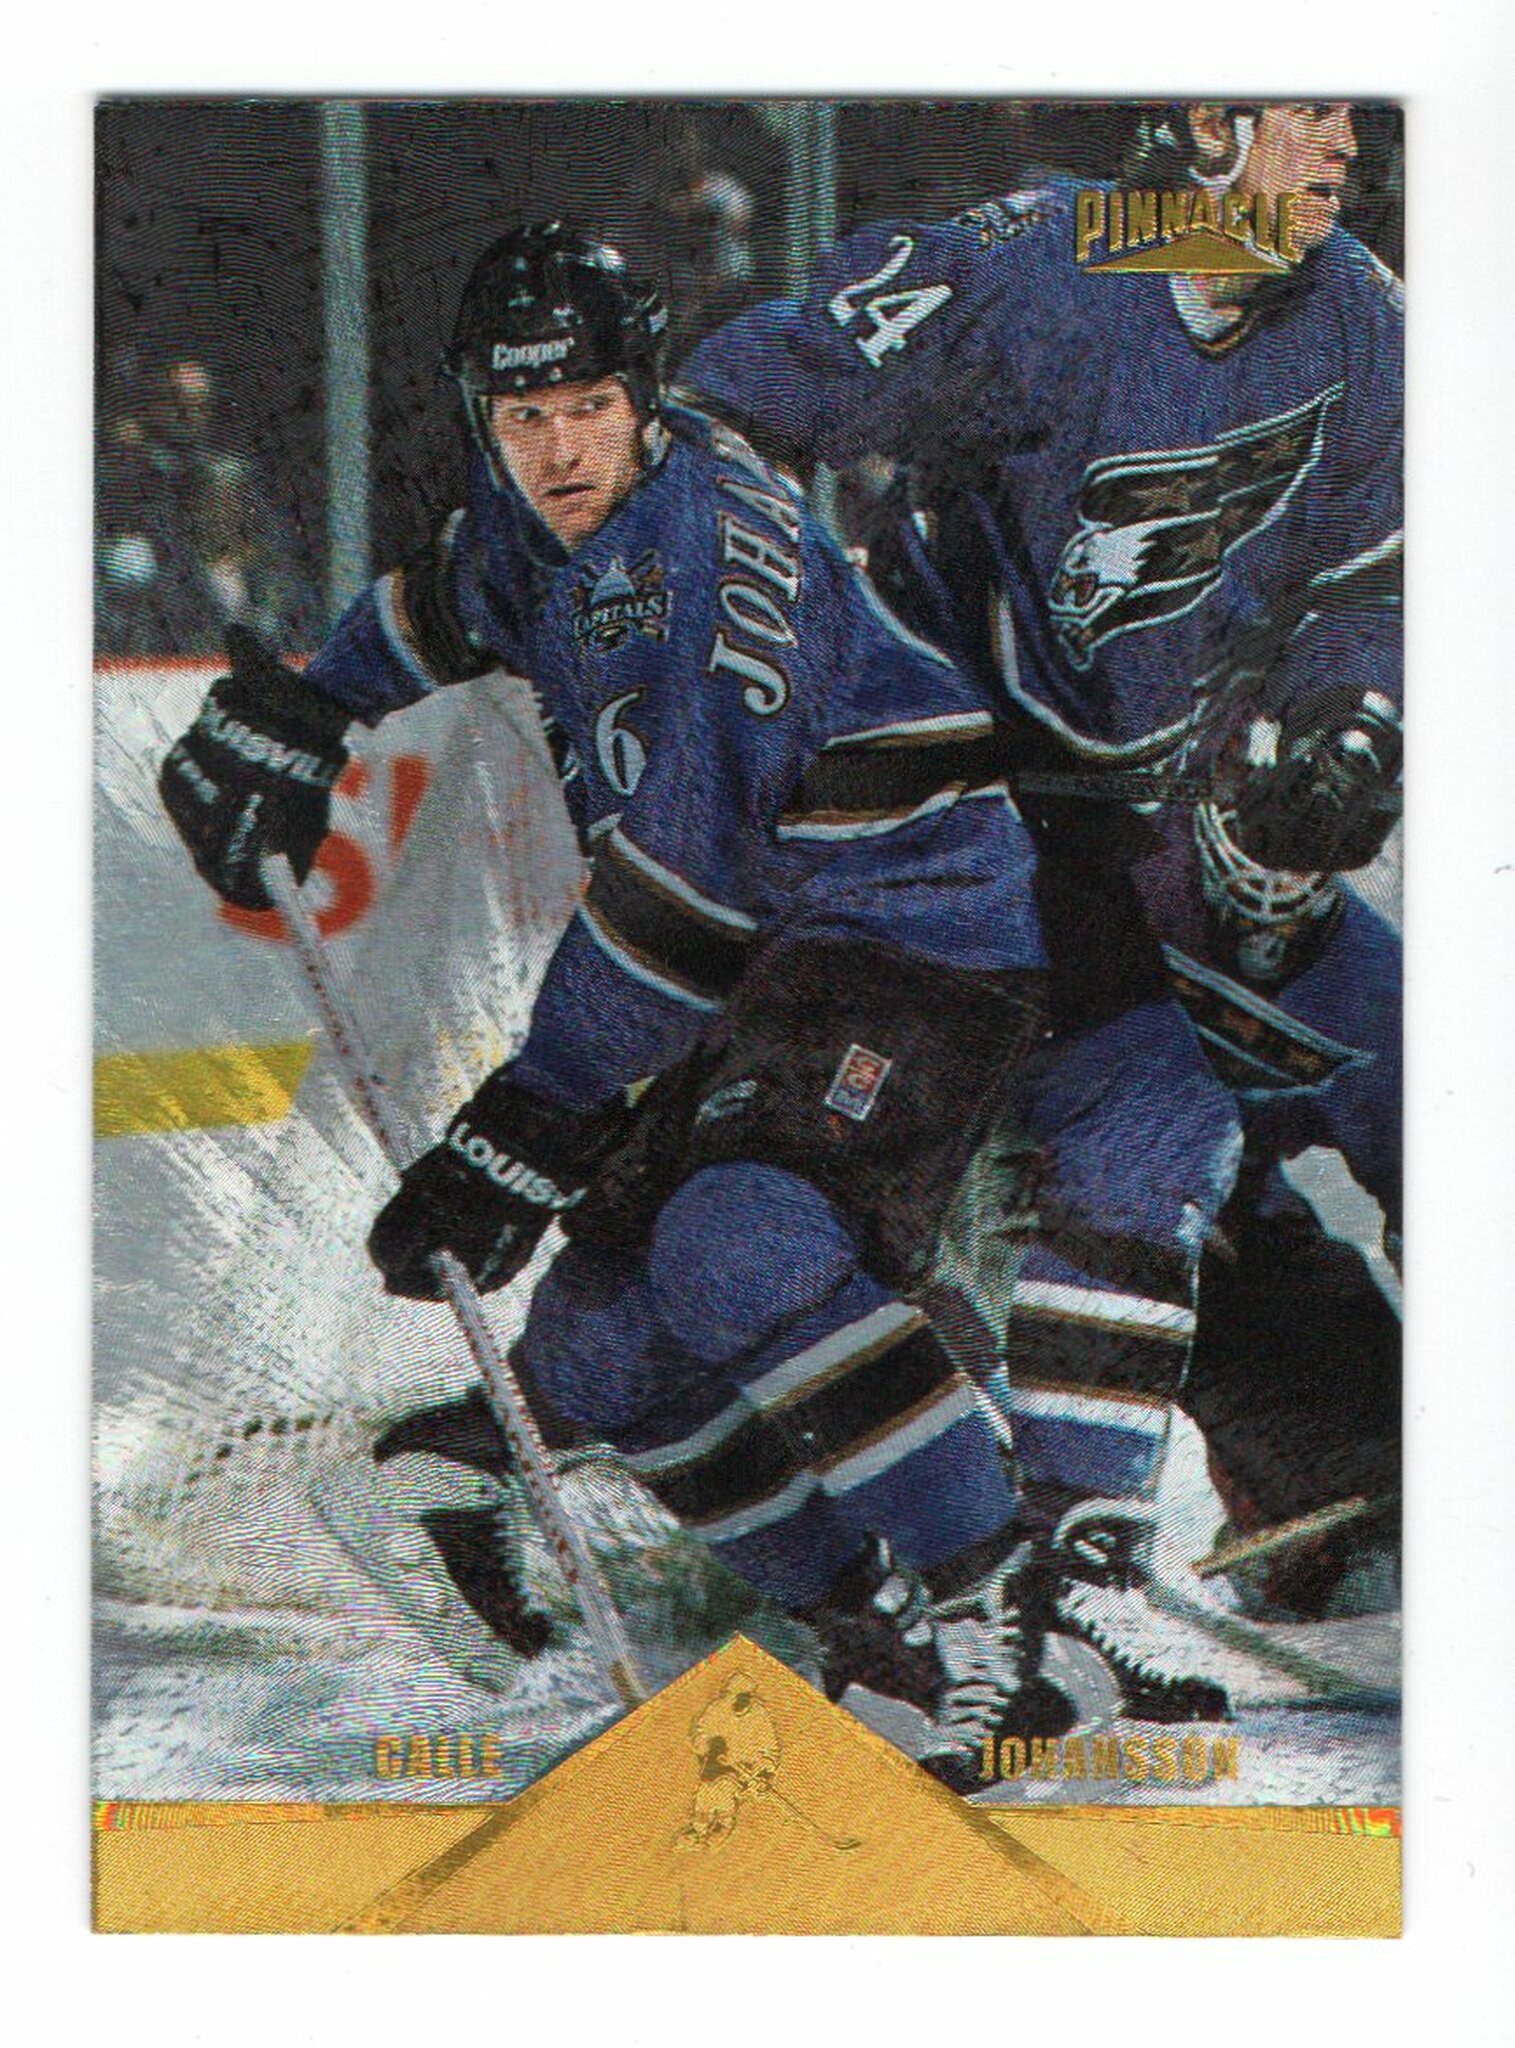 1996-97 Pinnacle Rink Collection #85 Calle Johansson (15-X99-CAPITALS)